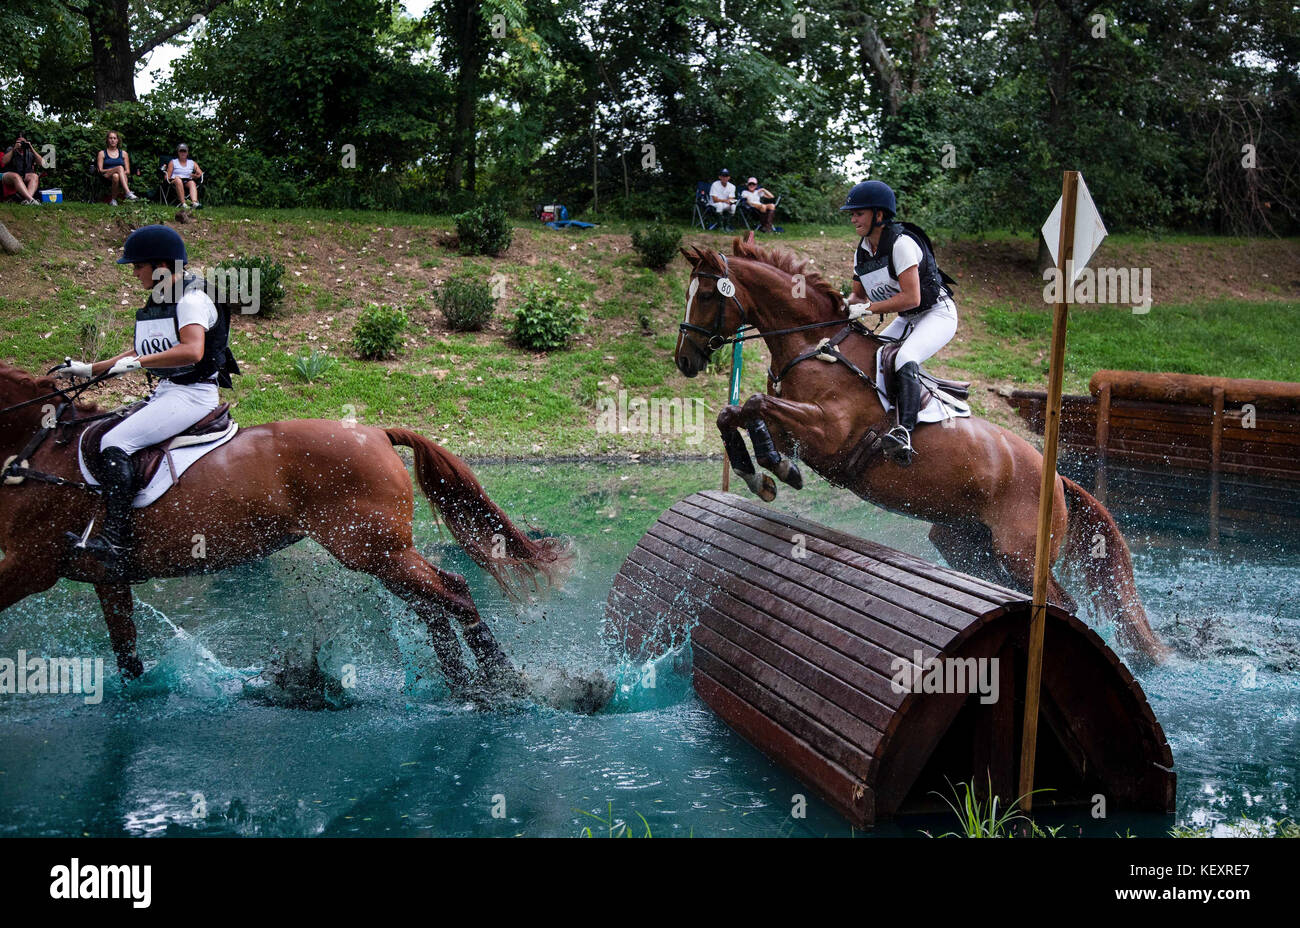 Photograph with equestrian jumping on horse during cross-country competition, Purcellville, Virginia, USA Stock Photo